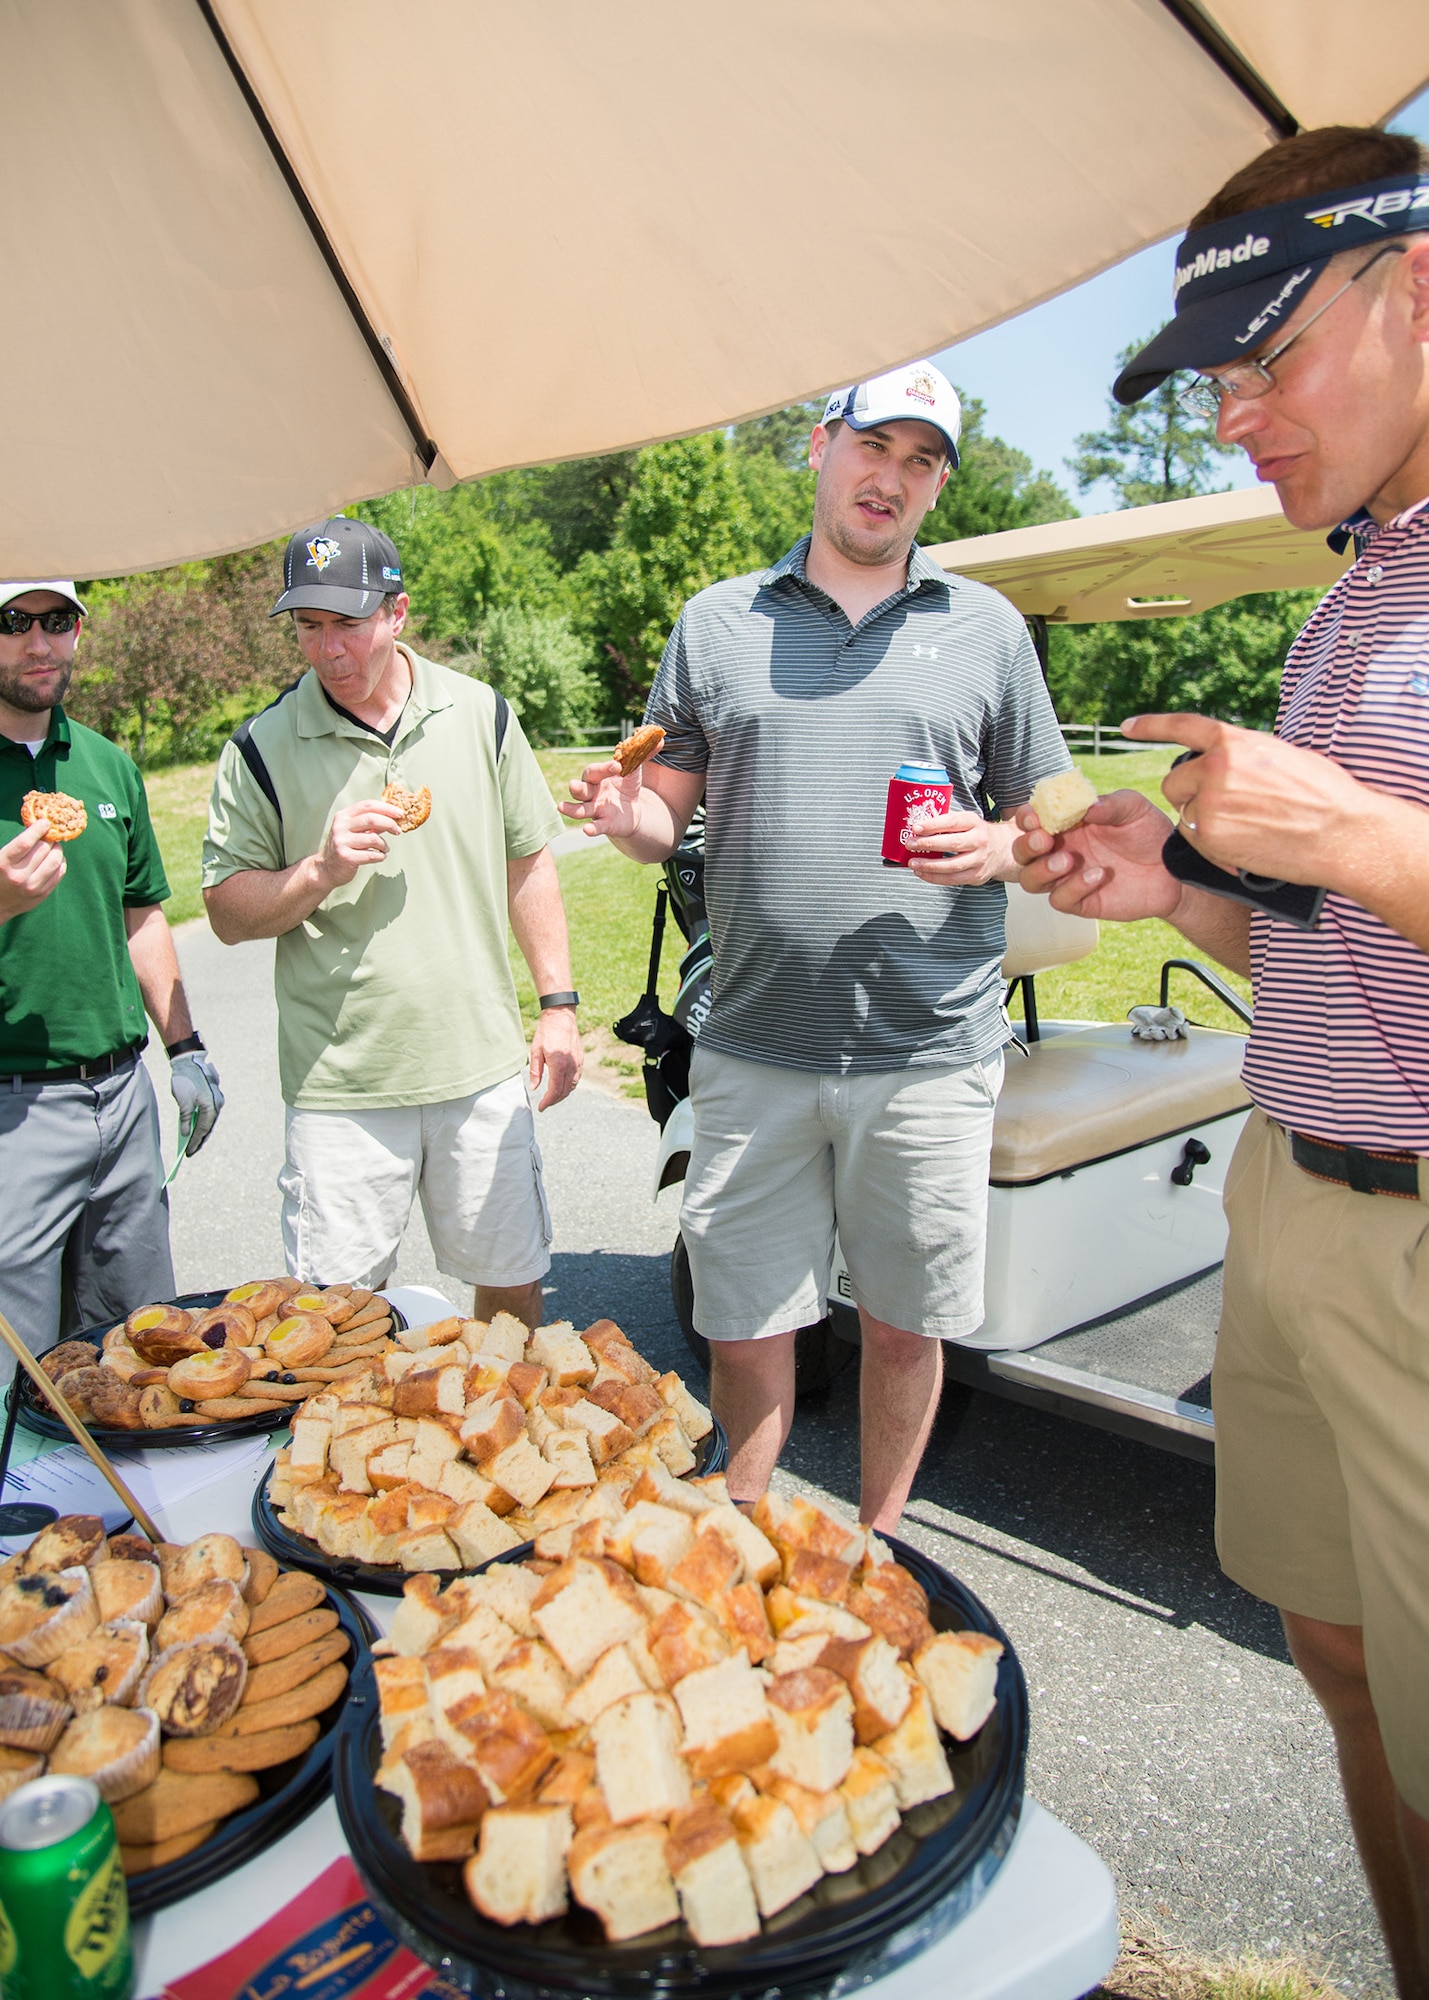 Participants of the 2017 spring Bluesuiters Golf Tournament take a break and enjoy some snacks from La Baguette Bakery May 17, 2017, 2016, at the Jonathan’s Landing Golf Course in Magnolia, Delaware. Four different local businesses set up break stations throughout the 18 hole course. (U.S. Air Force photo by Mauricio Campino)